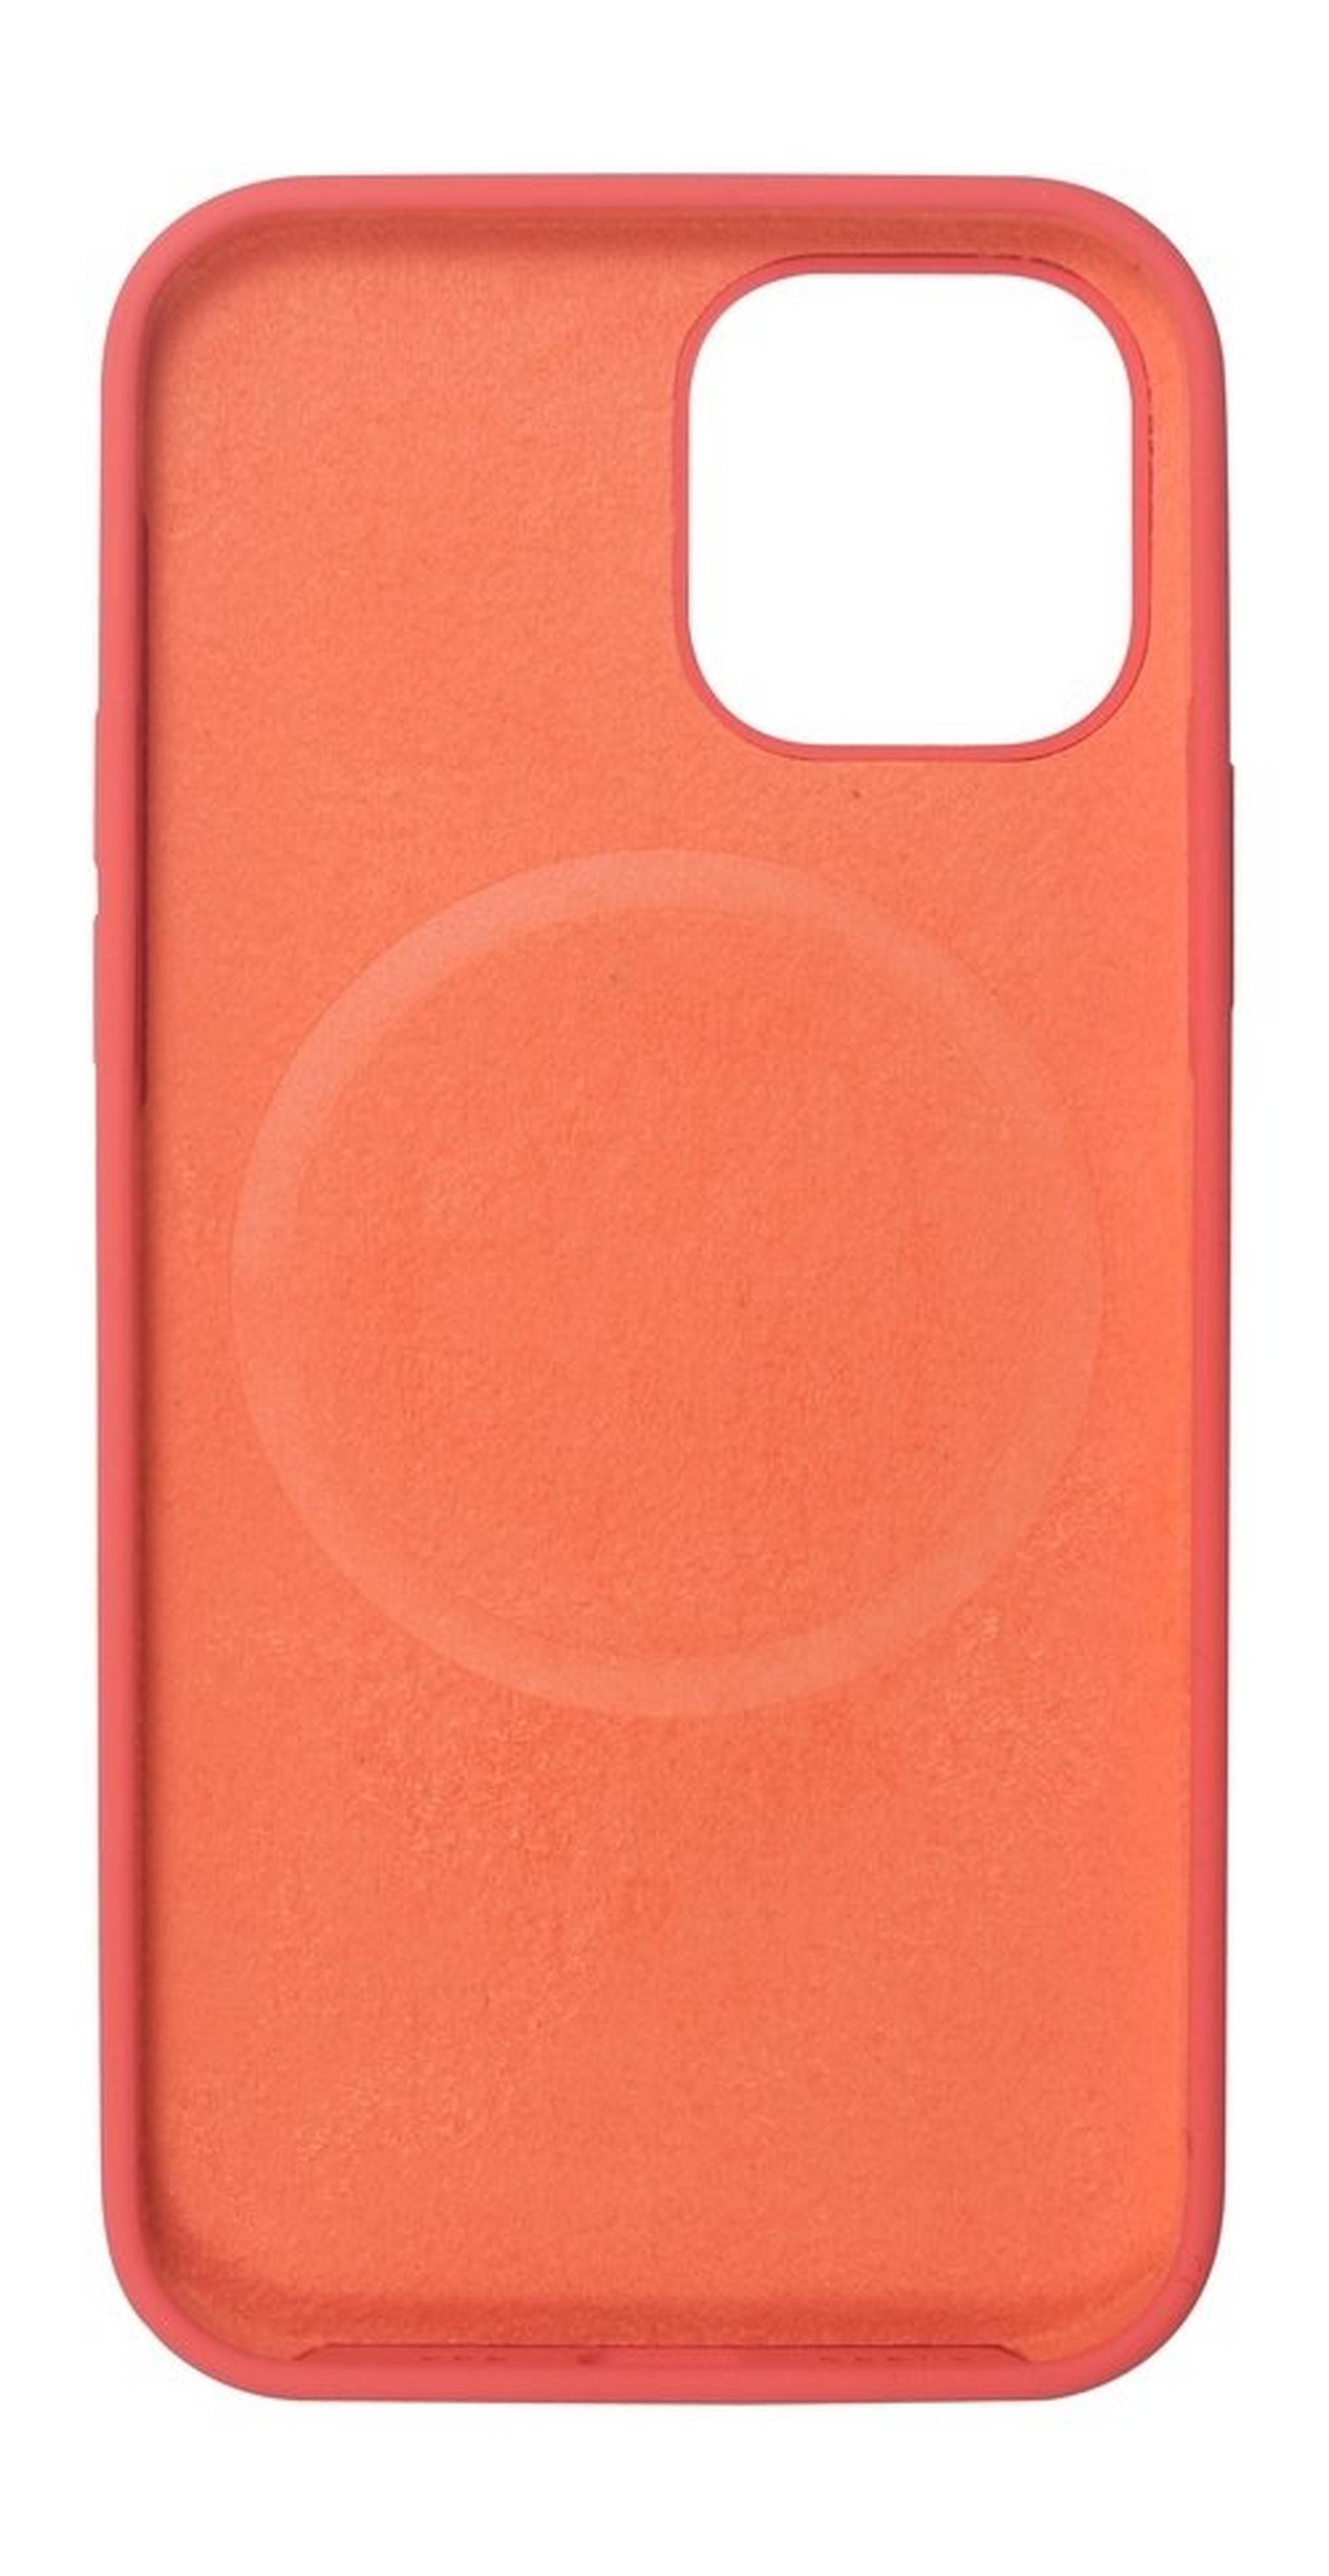 EQ Magsafe Silicone Case for iPhone 12/12 Pro - Pink Citrus